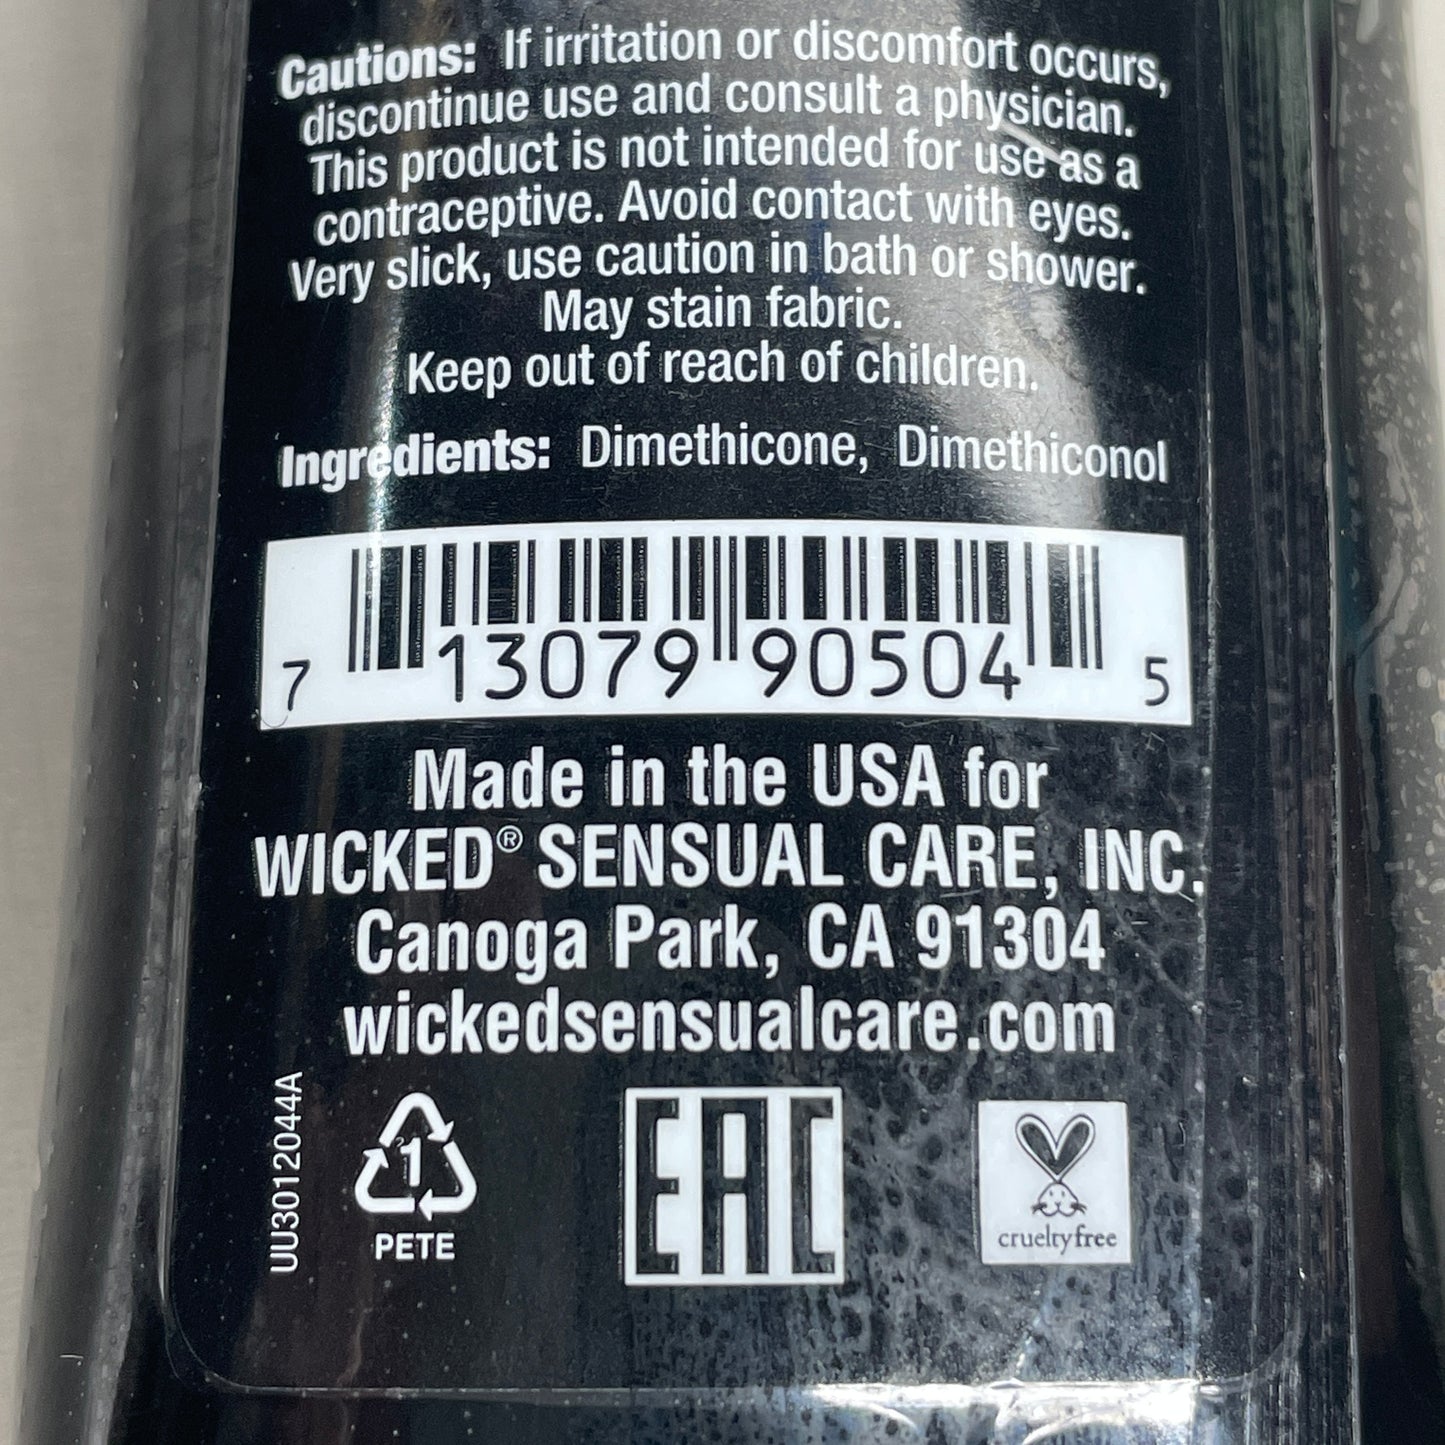 WICKED SENSUAL CARE Ultra Fragrance Free Silicone Based Intimate Lubricant 4 oz 11/24 (New)